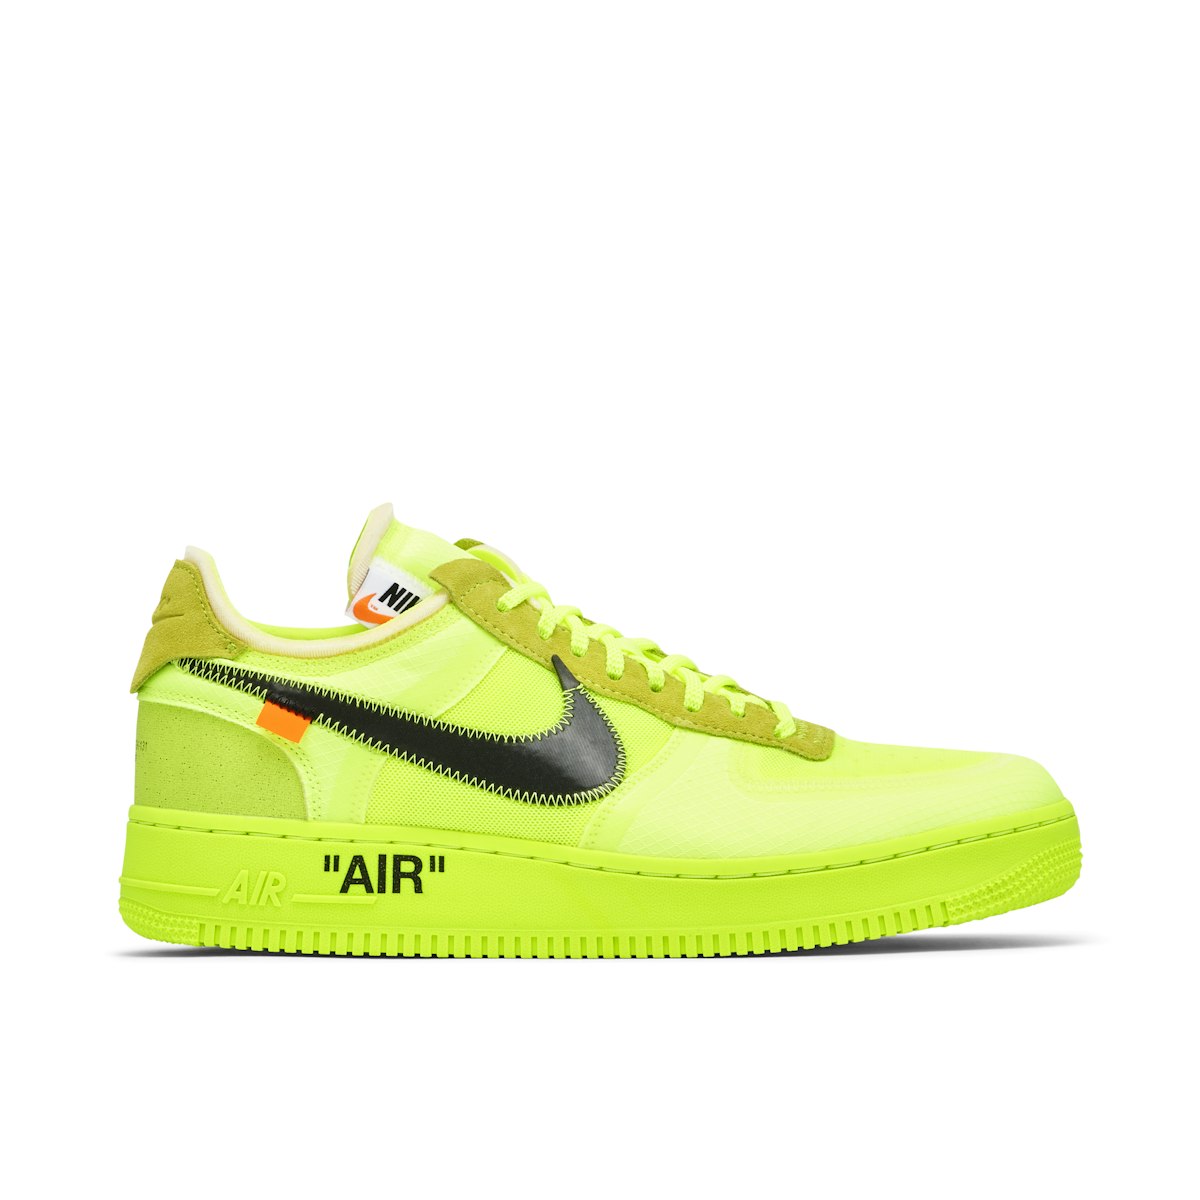 Release Date: OFF-WHITE x Nike Air Force 1 Low Volt •